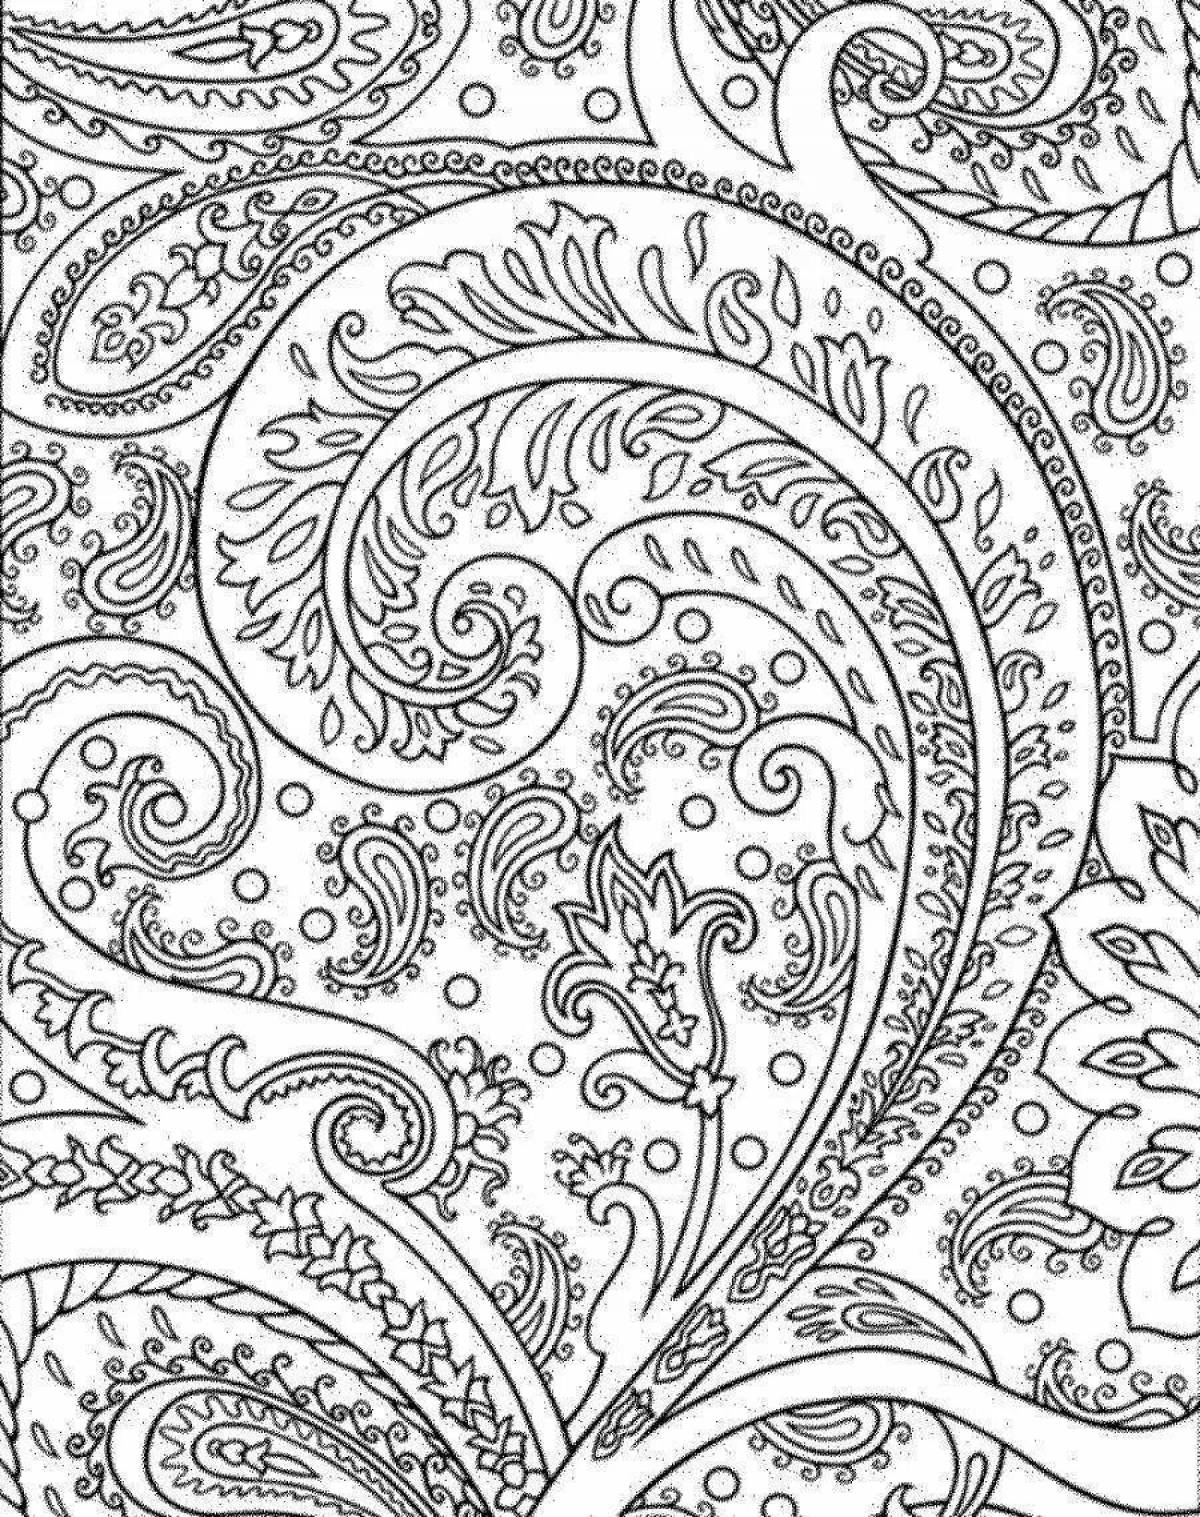 Glitter patterned coloring book